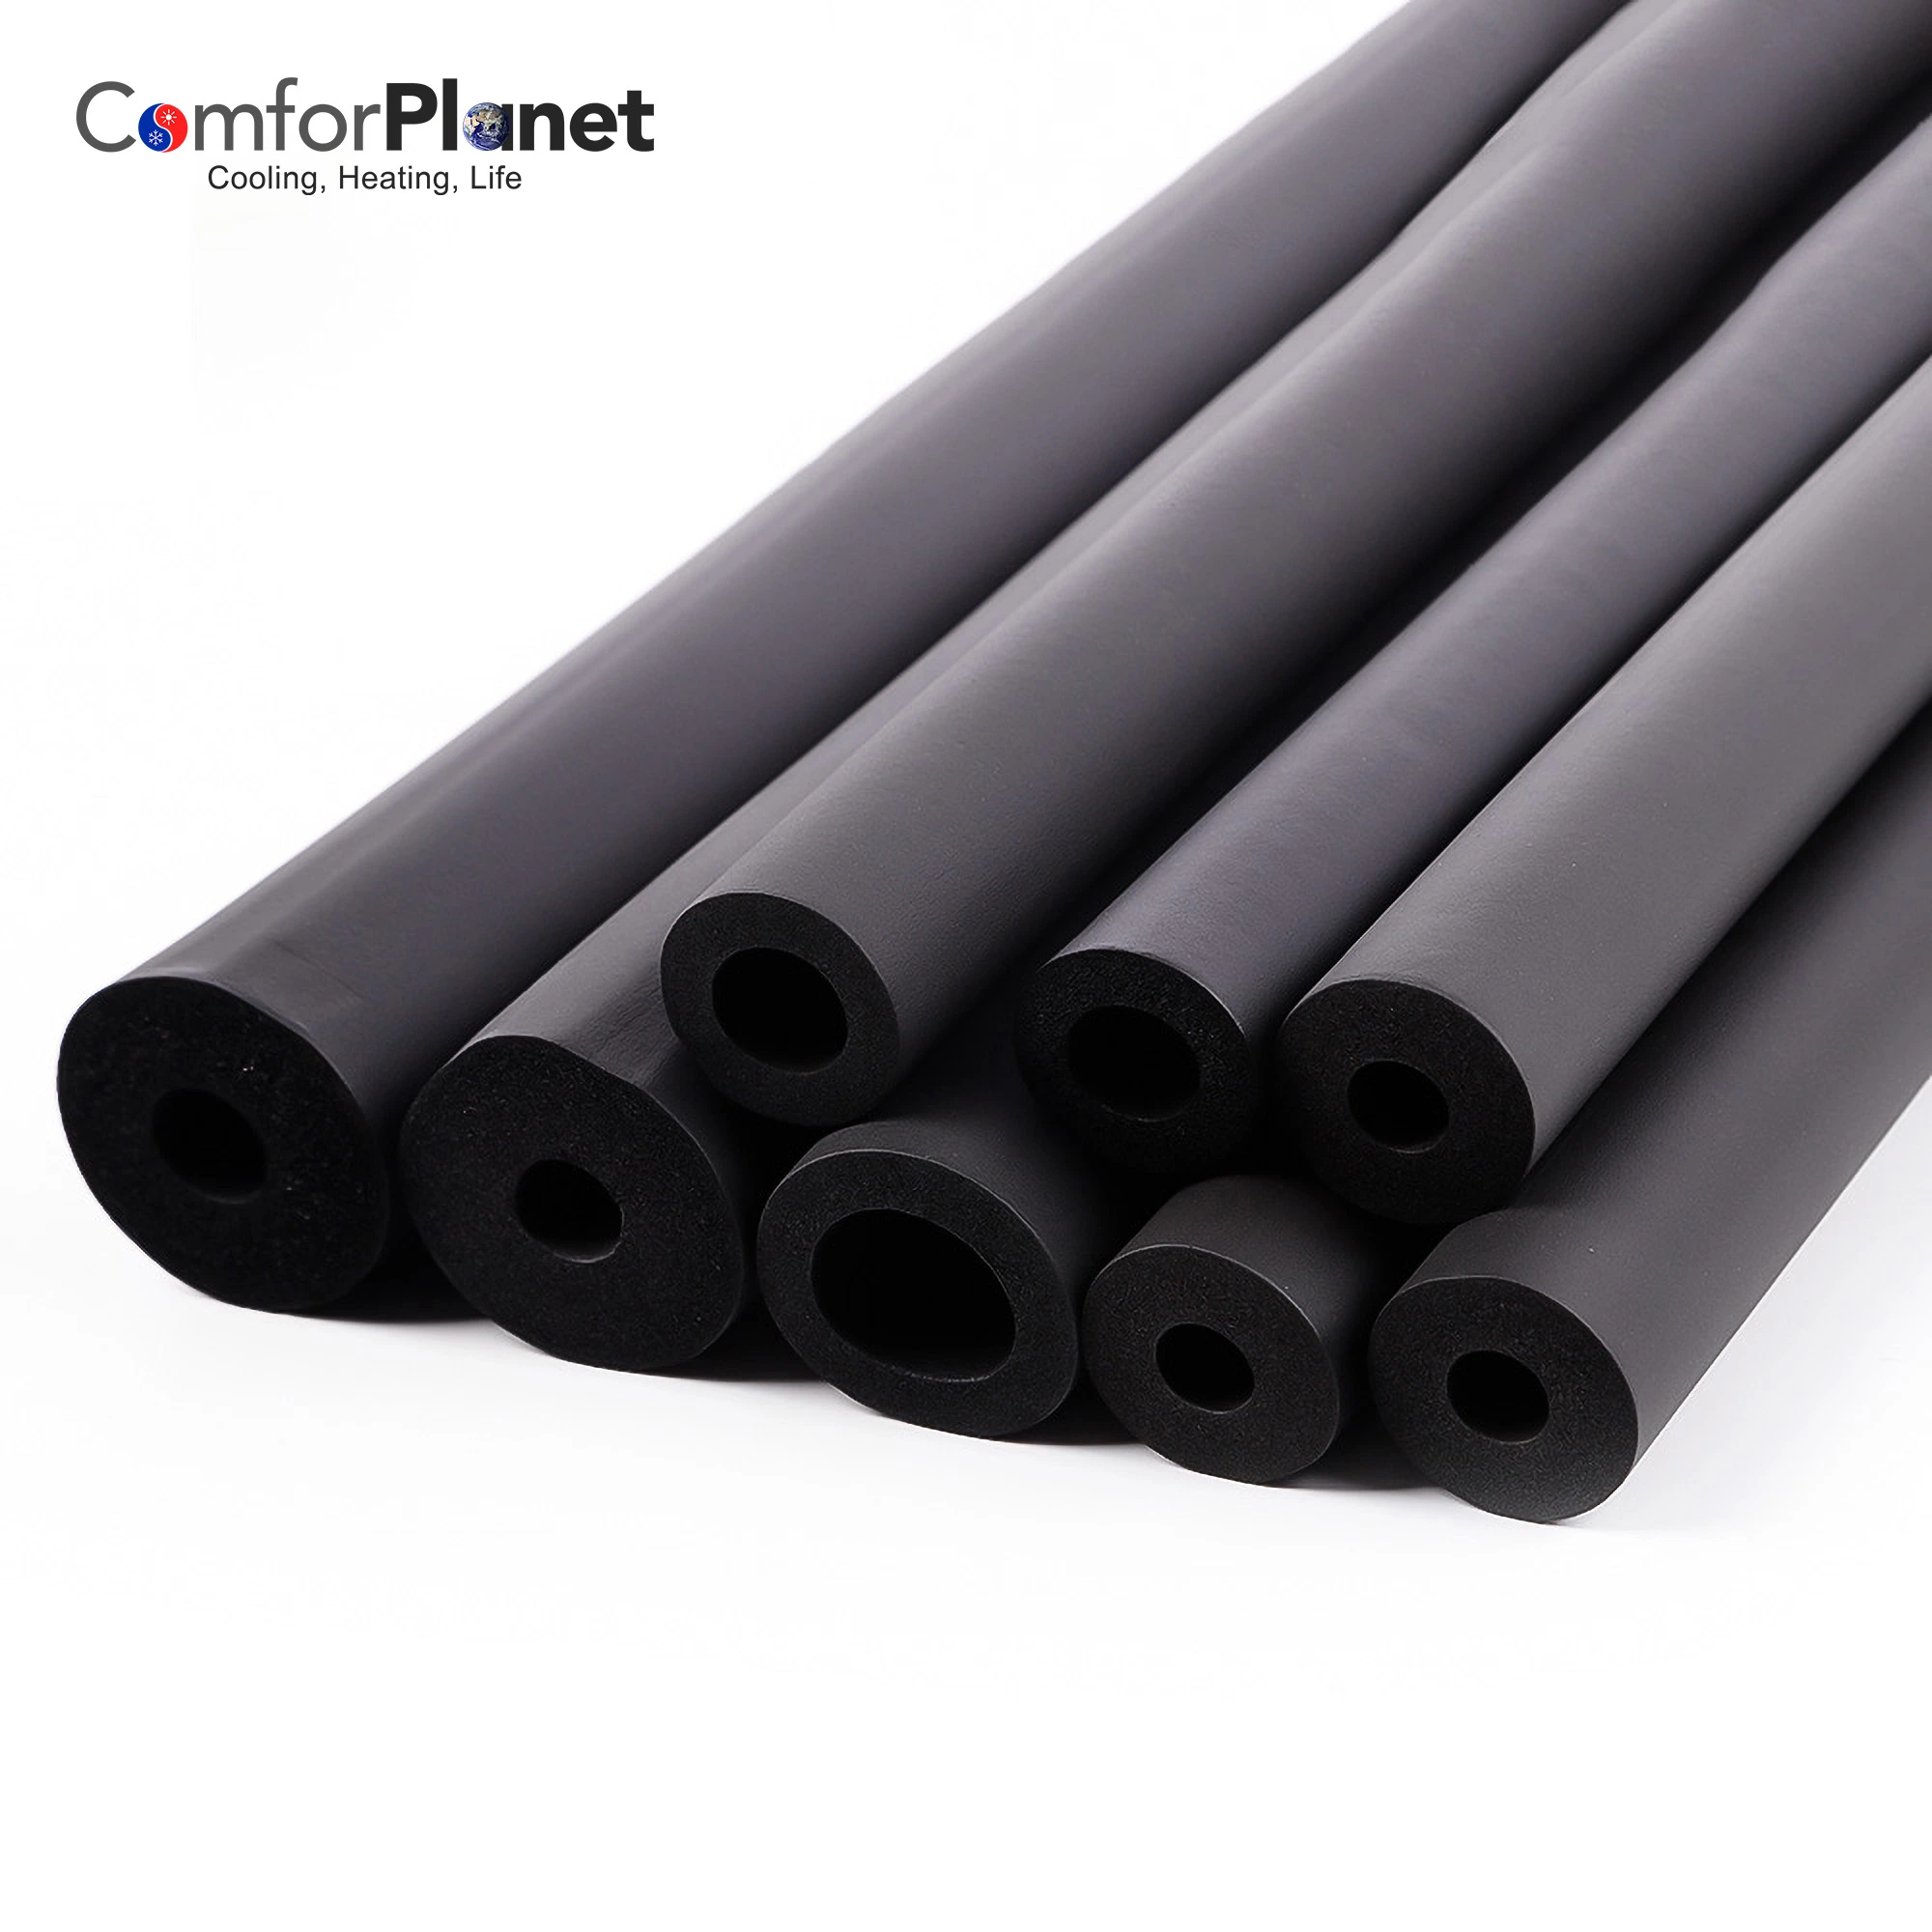 Fireproof Foam Thermal Heat Insulation Isolation Rubber